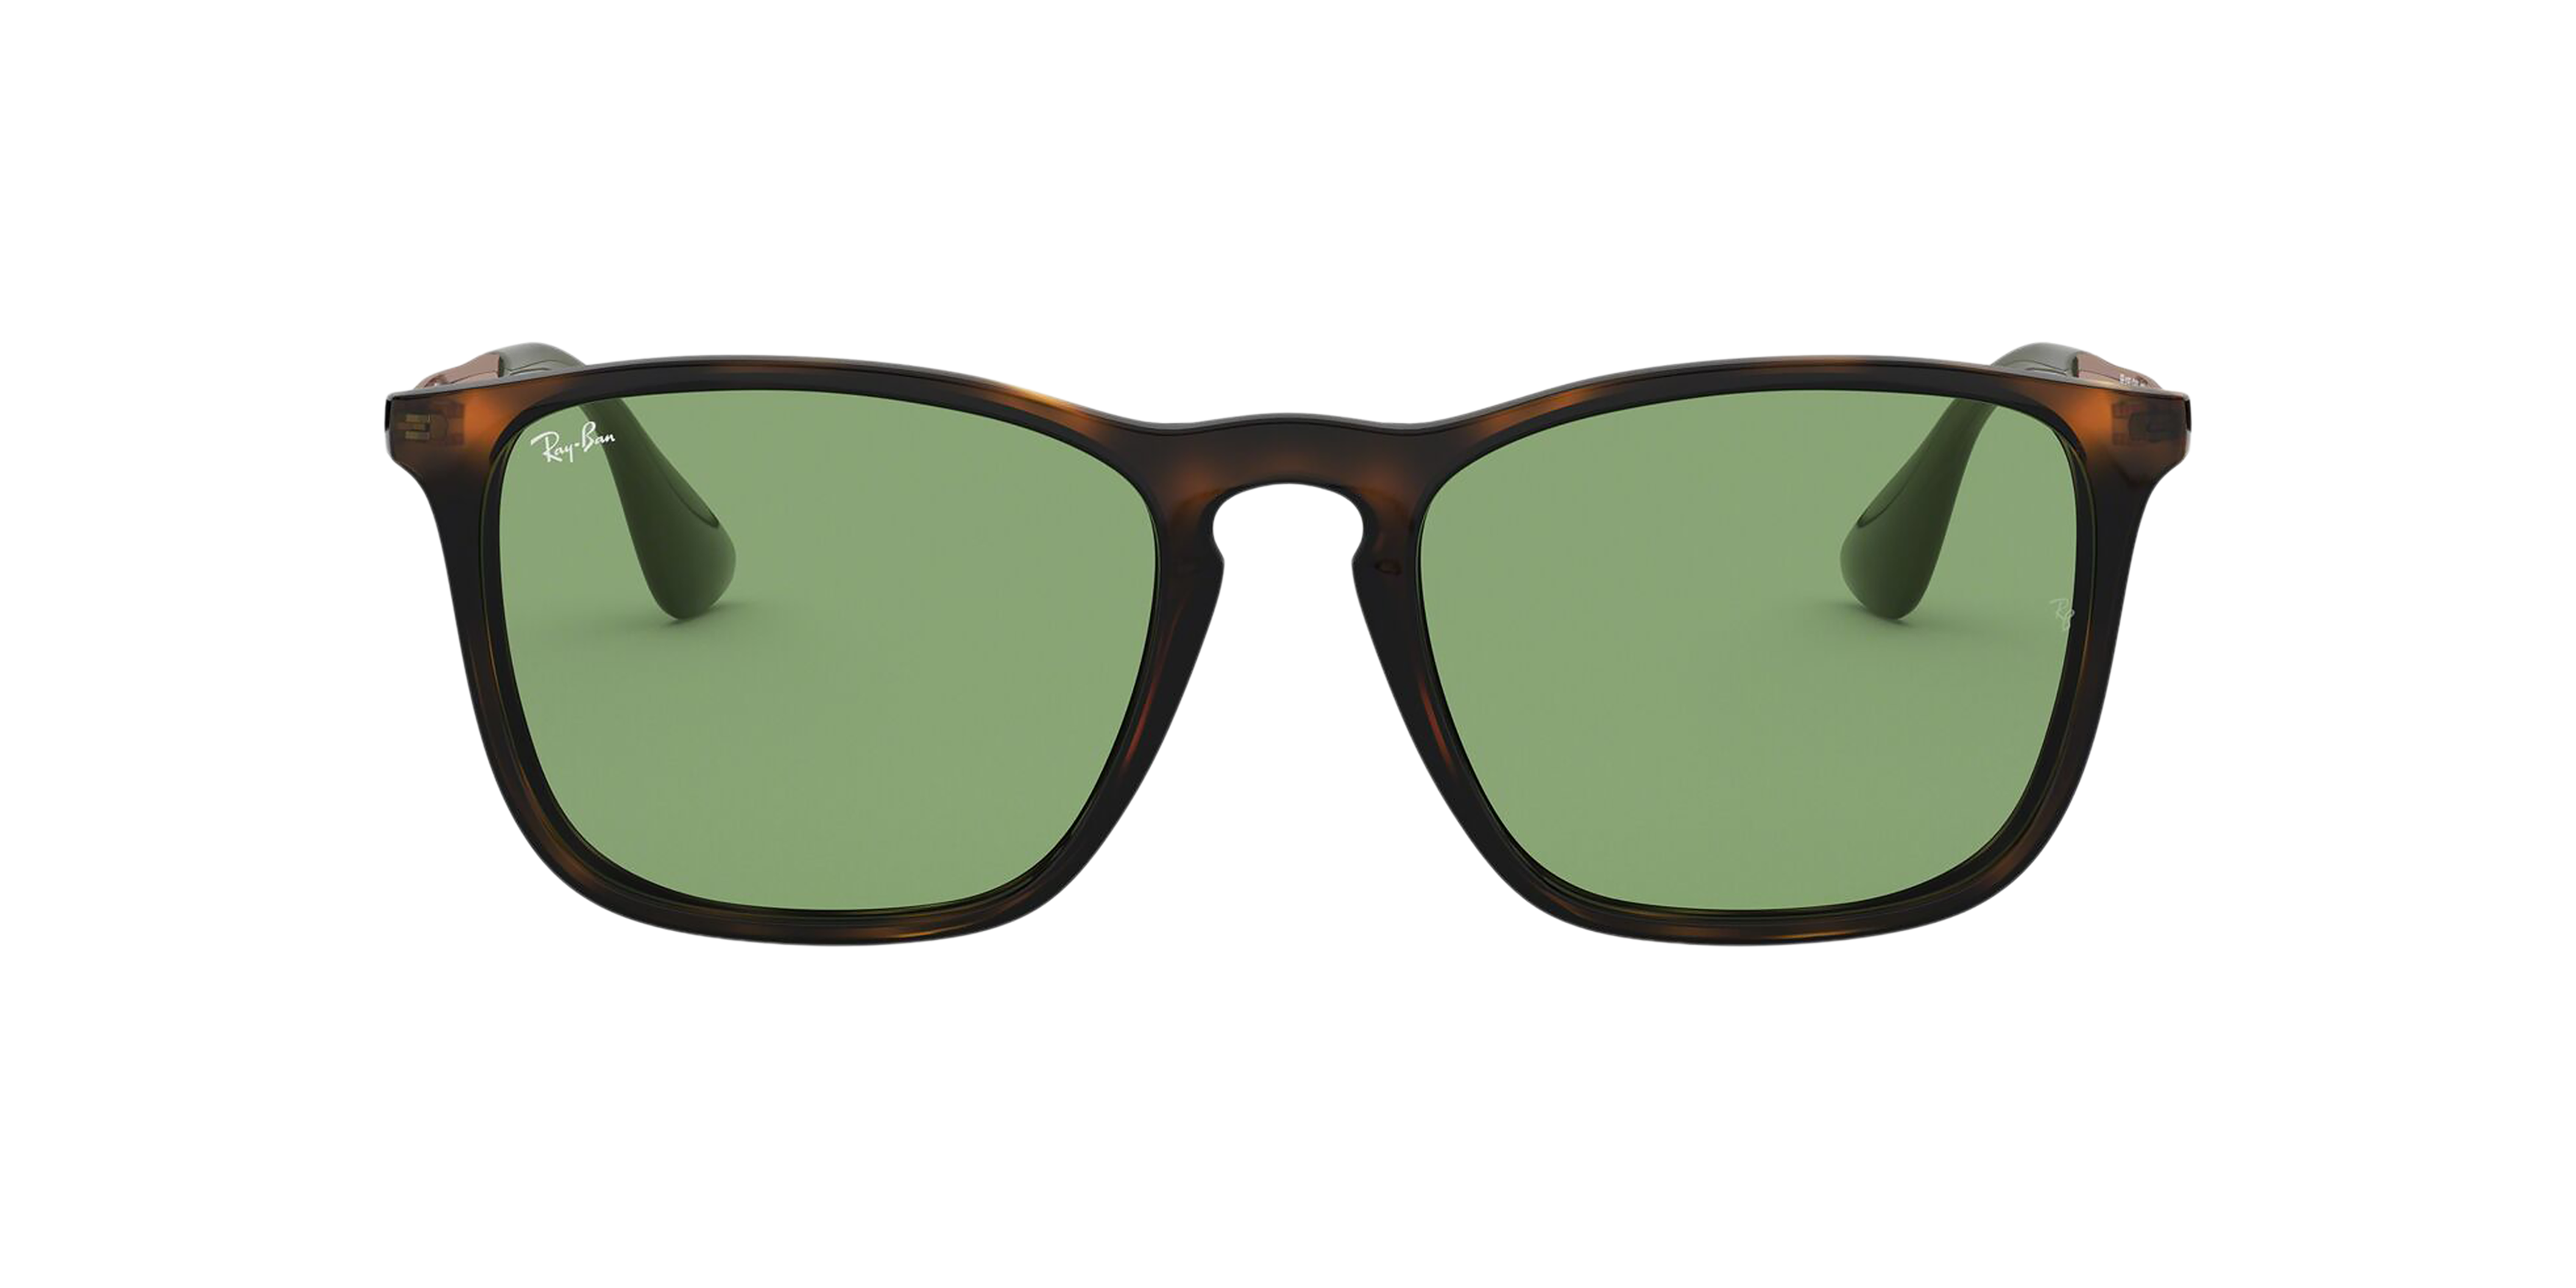 [products.image.front] Ray-Ban Chris RB4187 6393/2